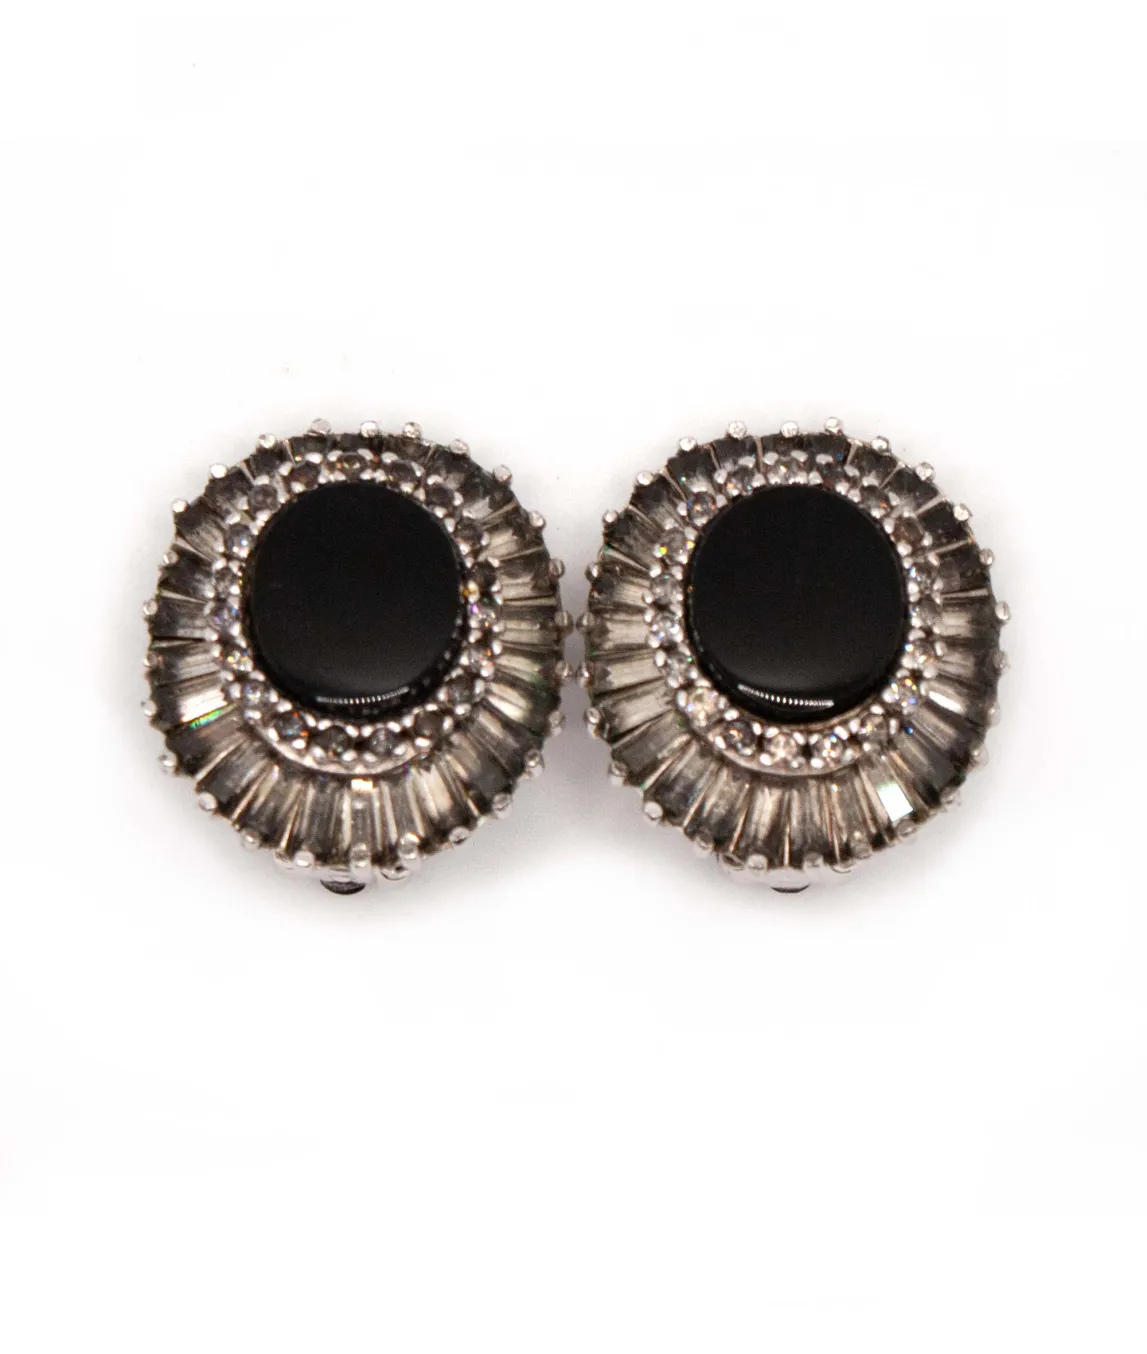 Vintage 1980s Panetta earrings with onyx and baguette crystals